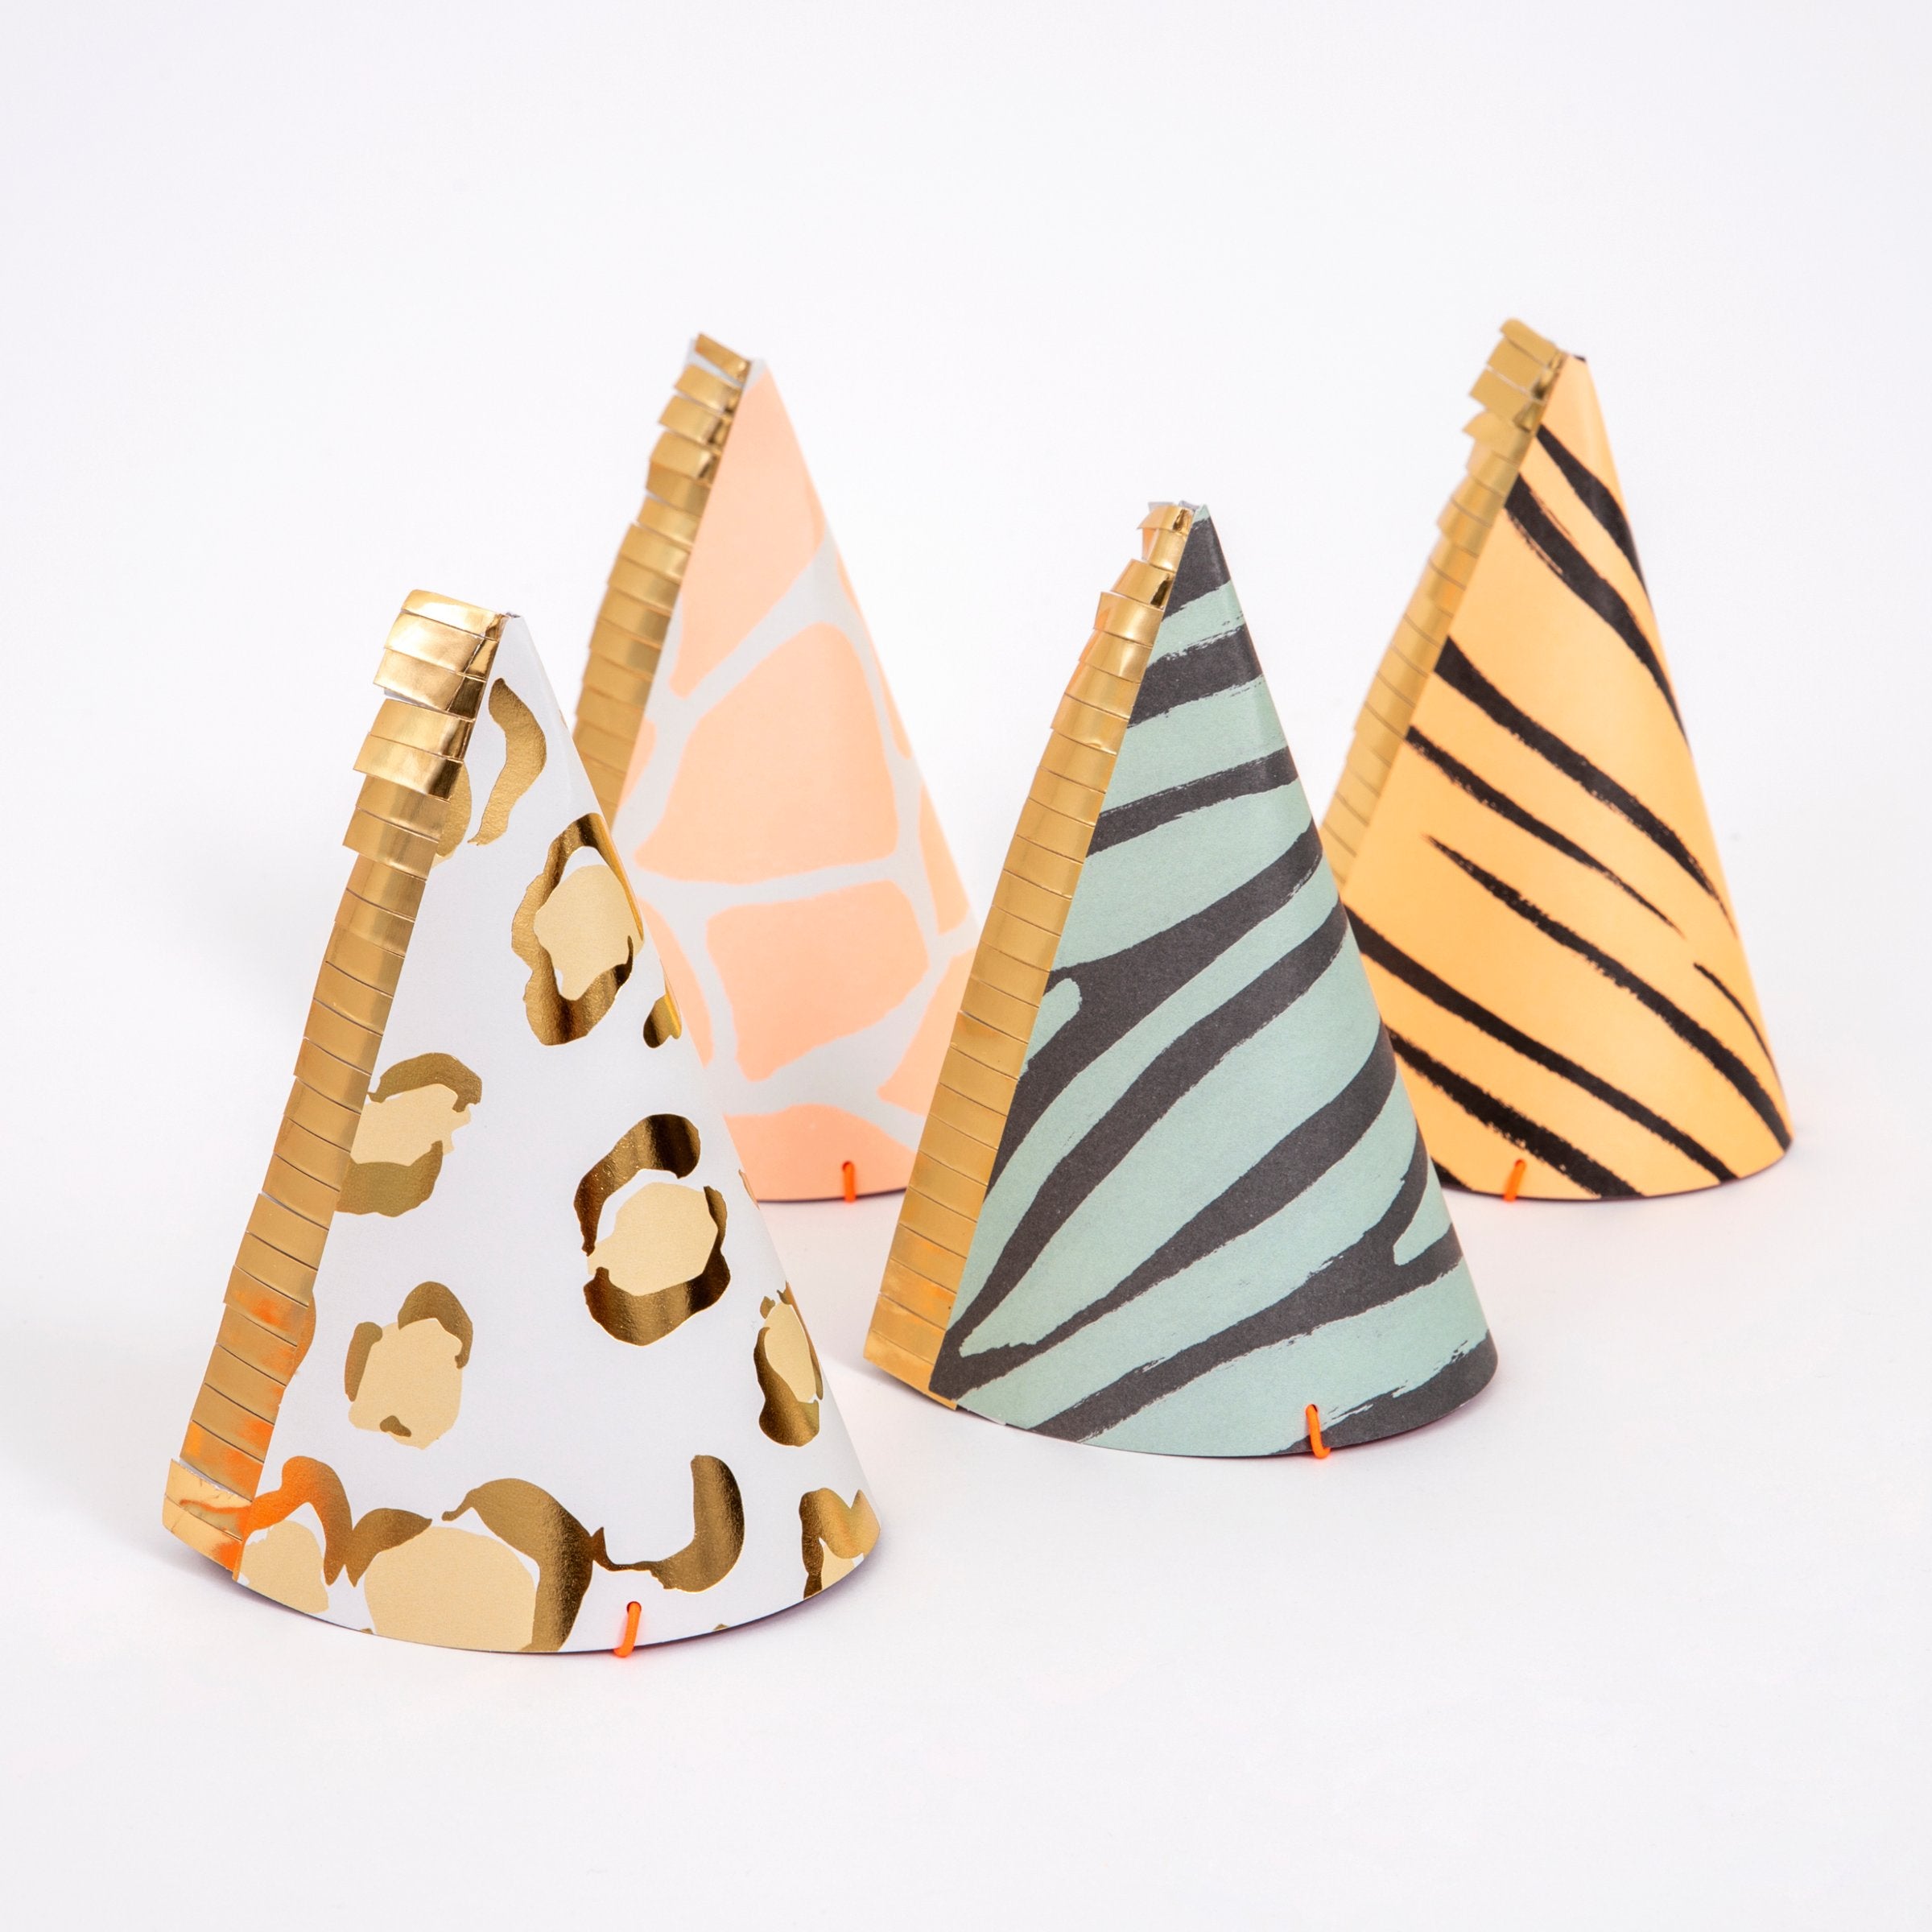 Our paper party hats, with an animal print design, are ideal for your safari theme party.